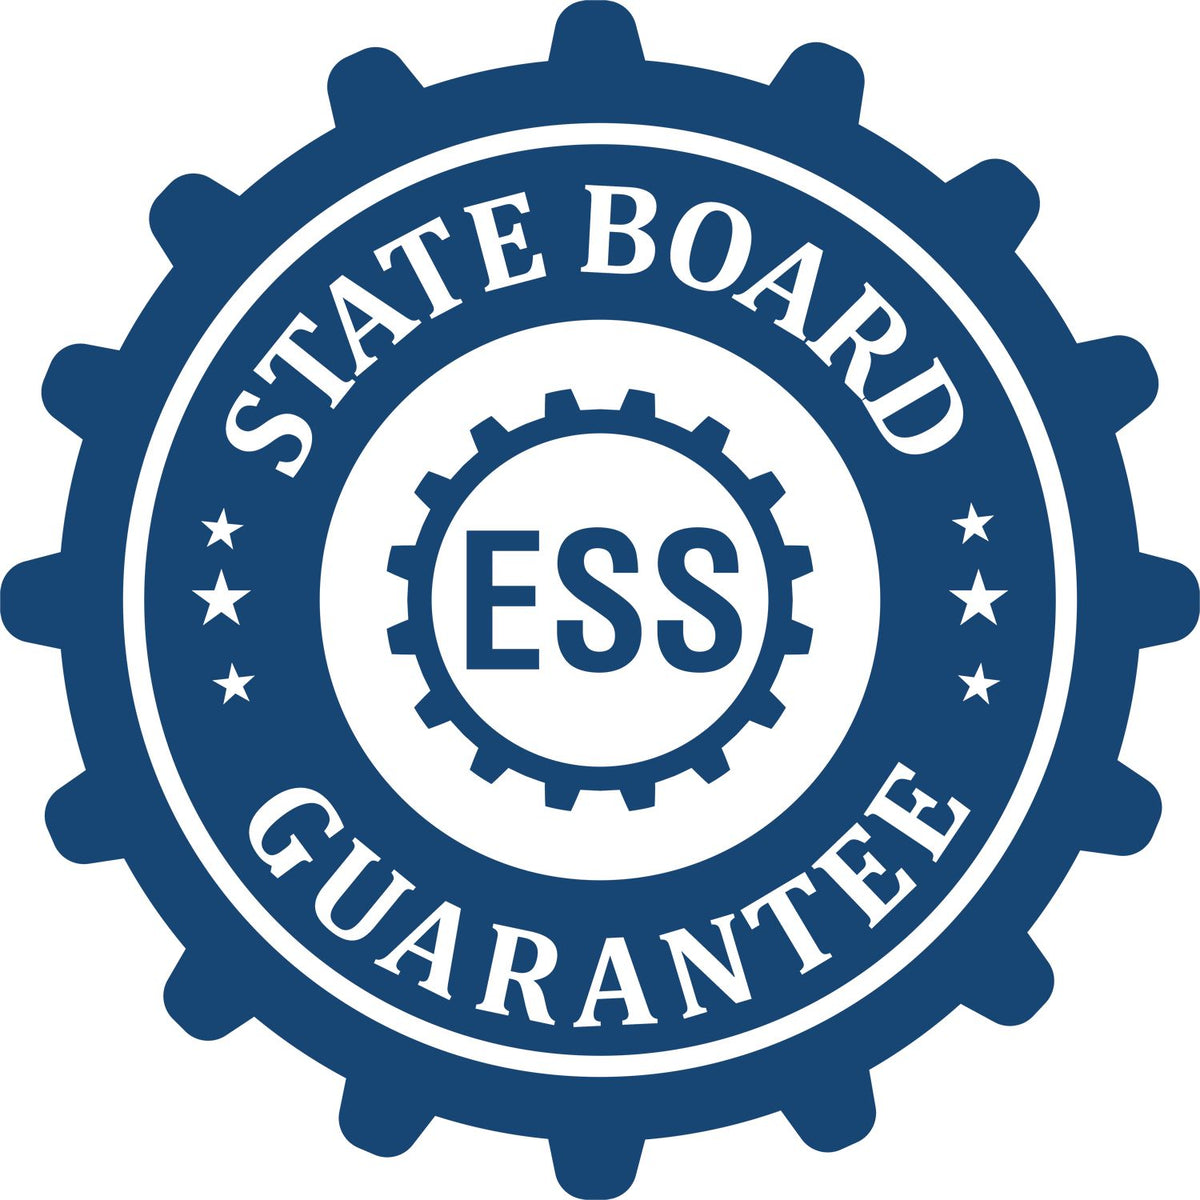 An emblem in a gear shape illustrating a state board guarantee for the Texas Geologist Desk Seal